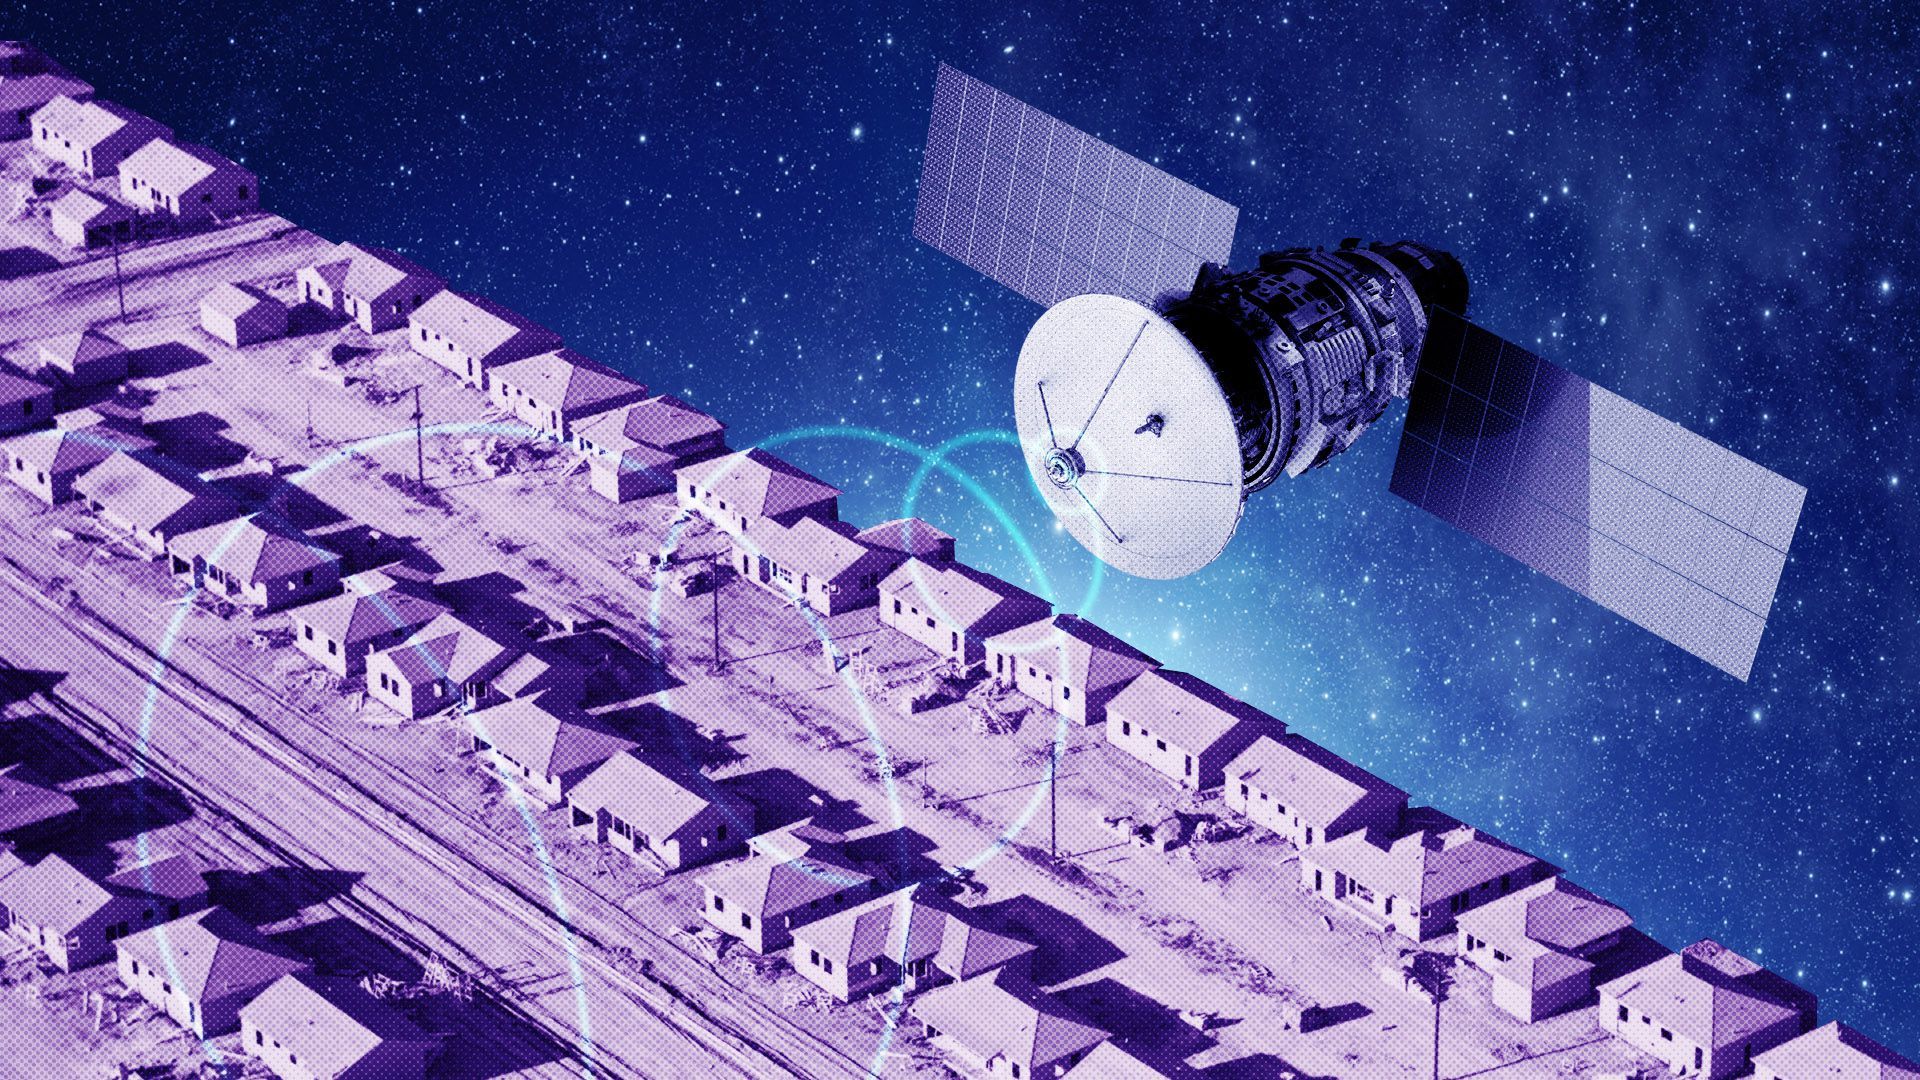 Illustration of a satellite floating above a suburb